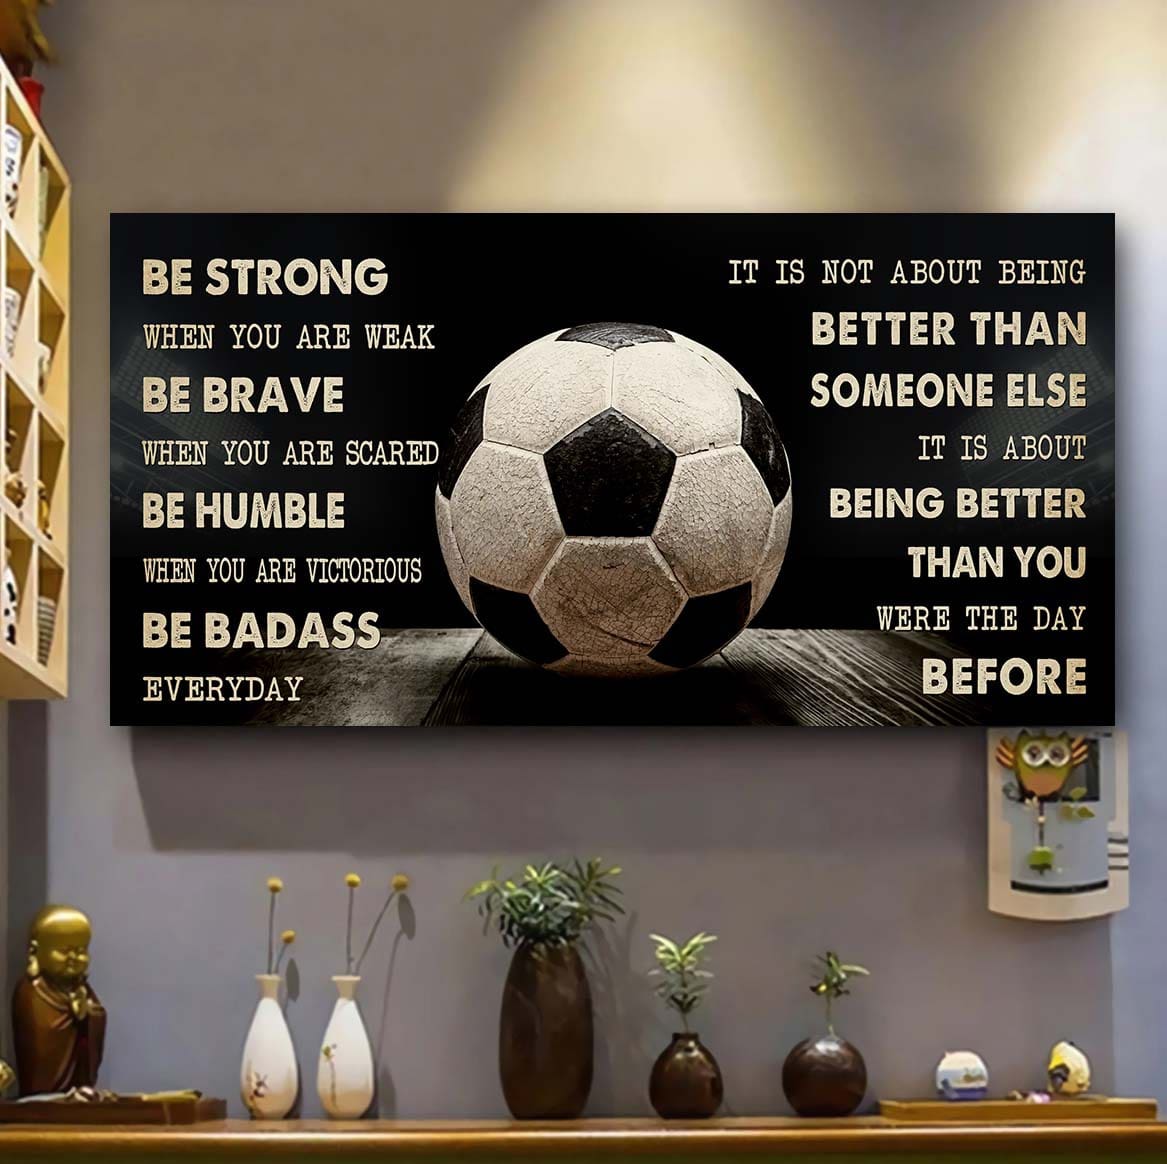 Hockey canvas It Is Not About Being Better Than Someone Else - Be Strong When You Are Weak